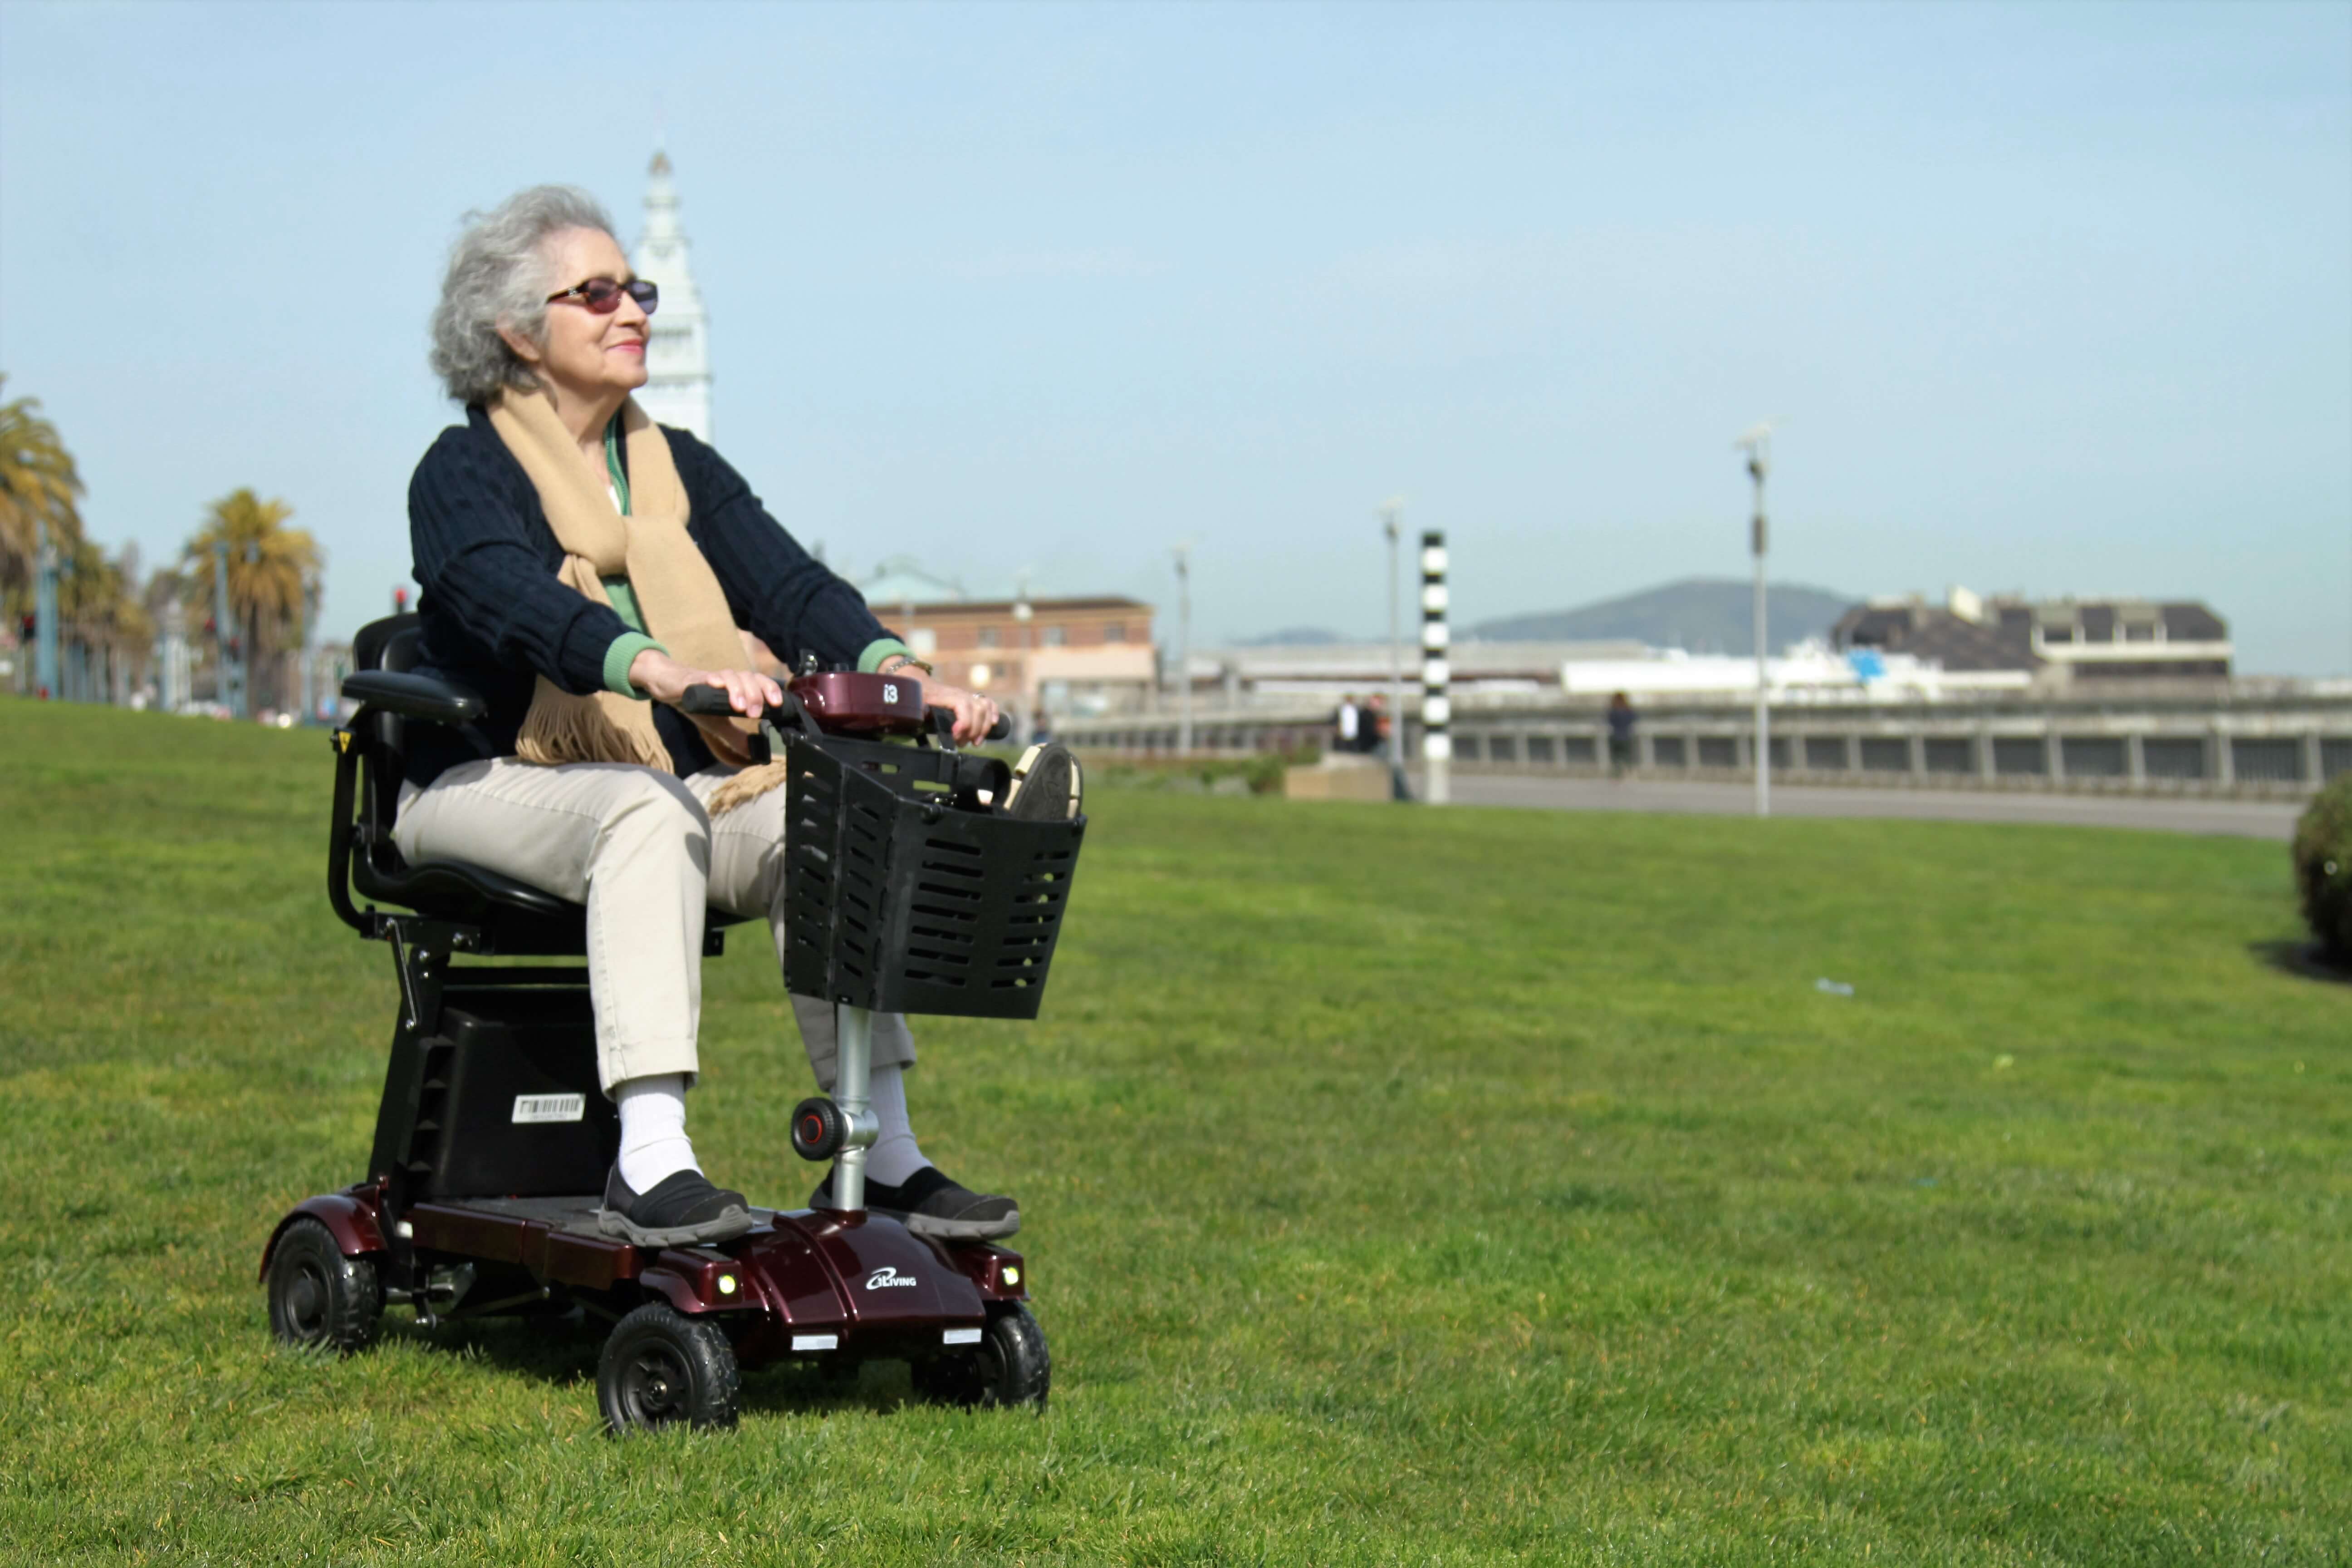 Riding a portable mobility scooter over grass